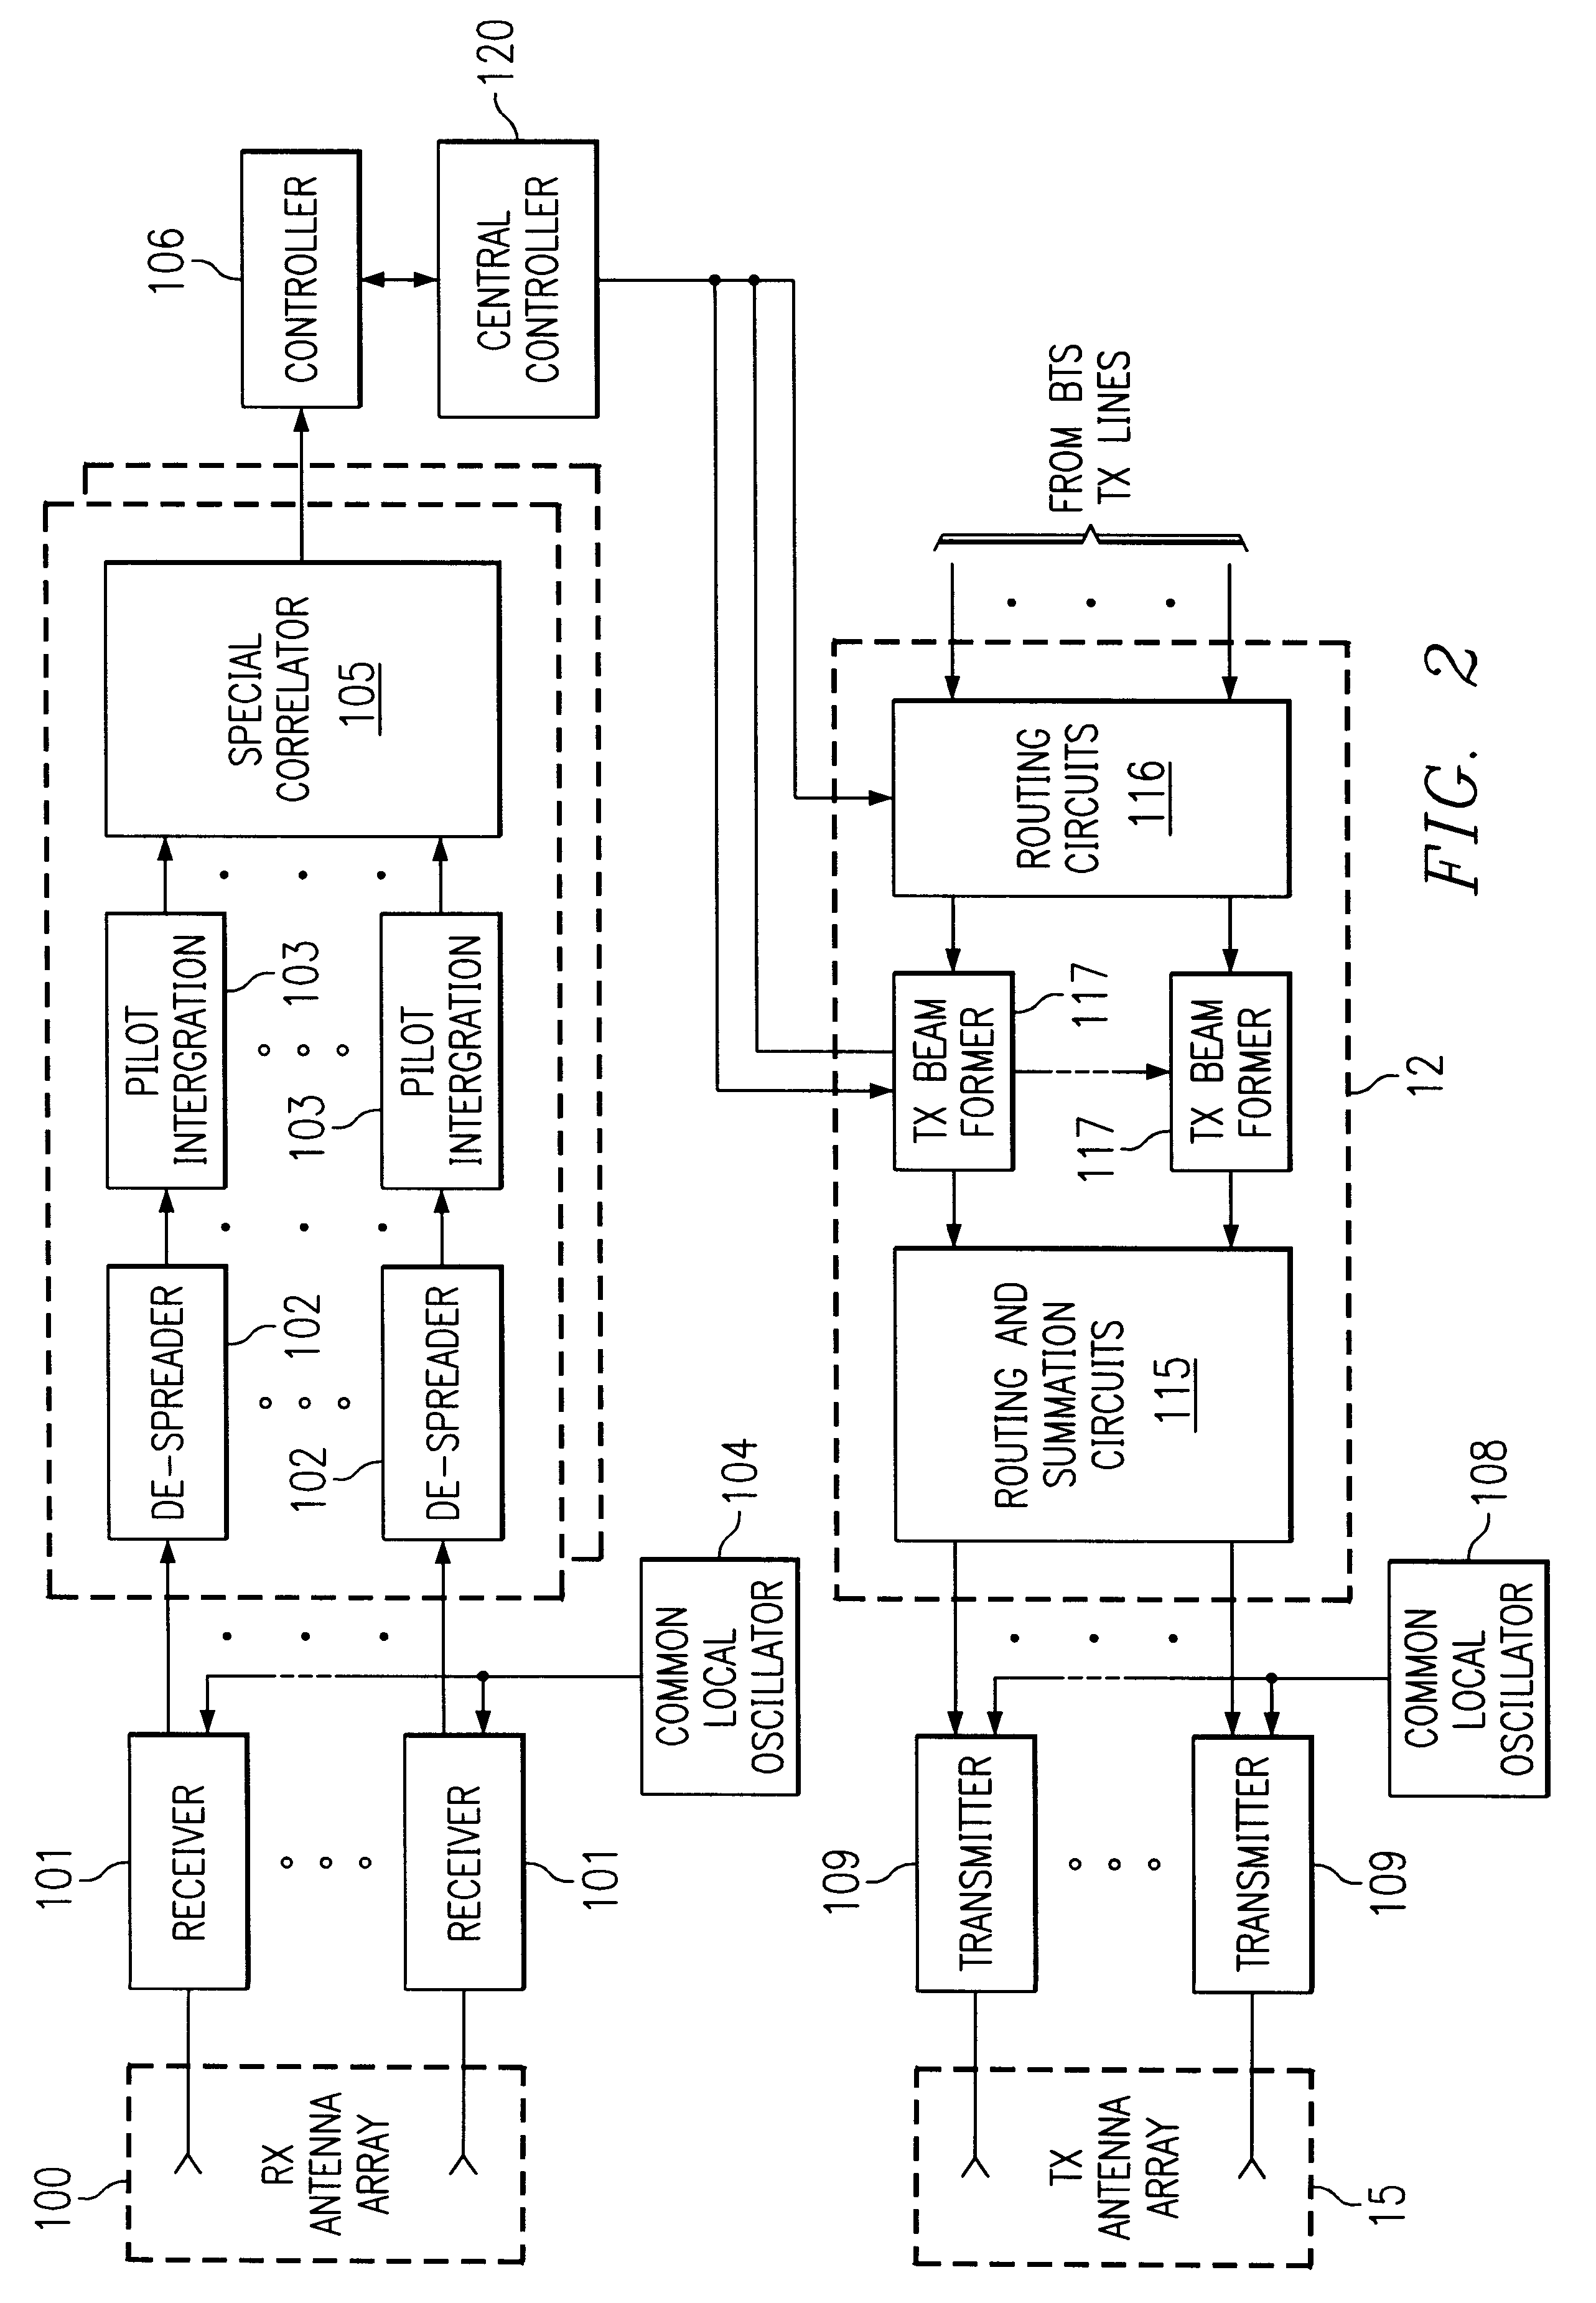 Simultaneous forward link beam forming and learning method for mobile high rate data traffic